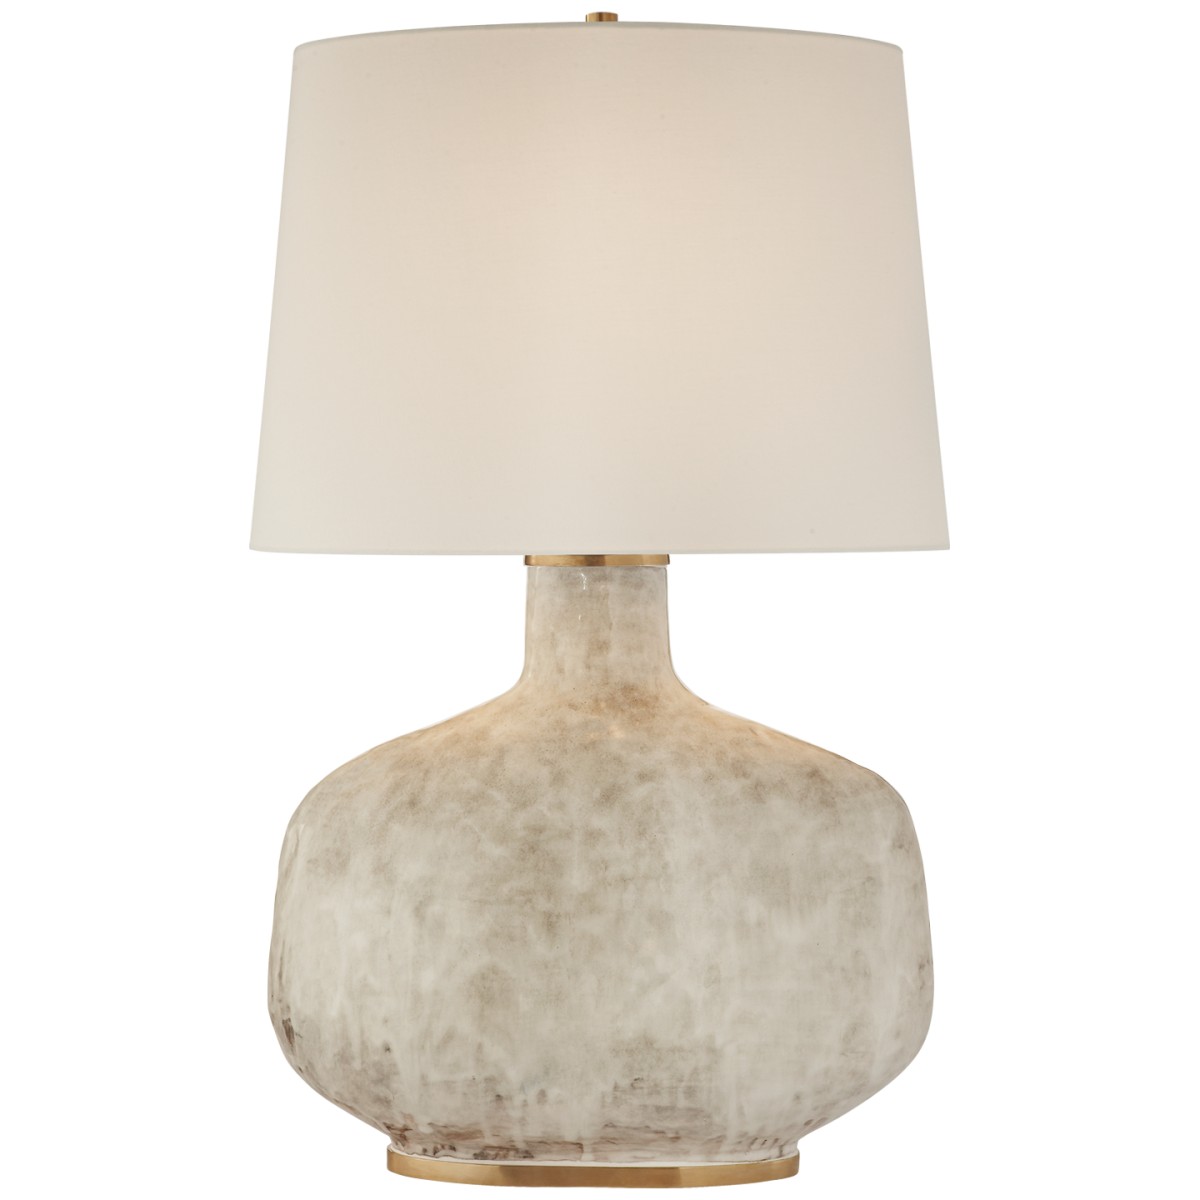 Beton Large Table Lamp with Linen Shade